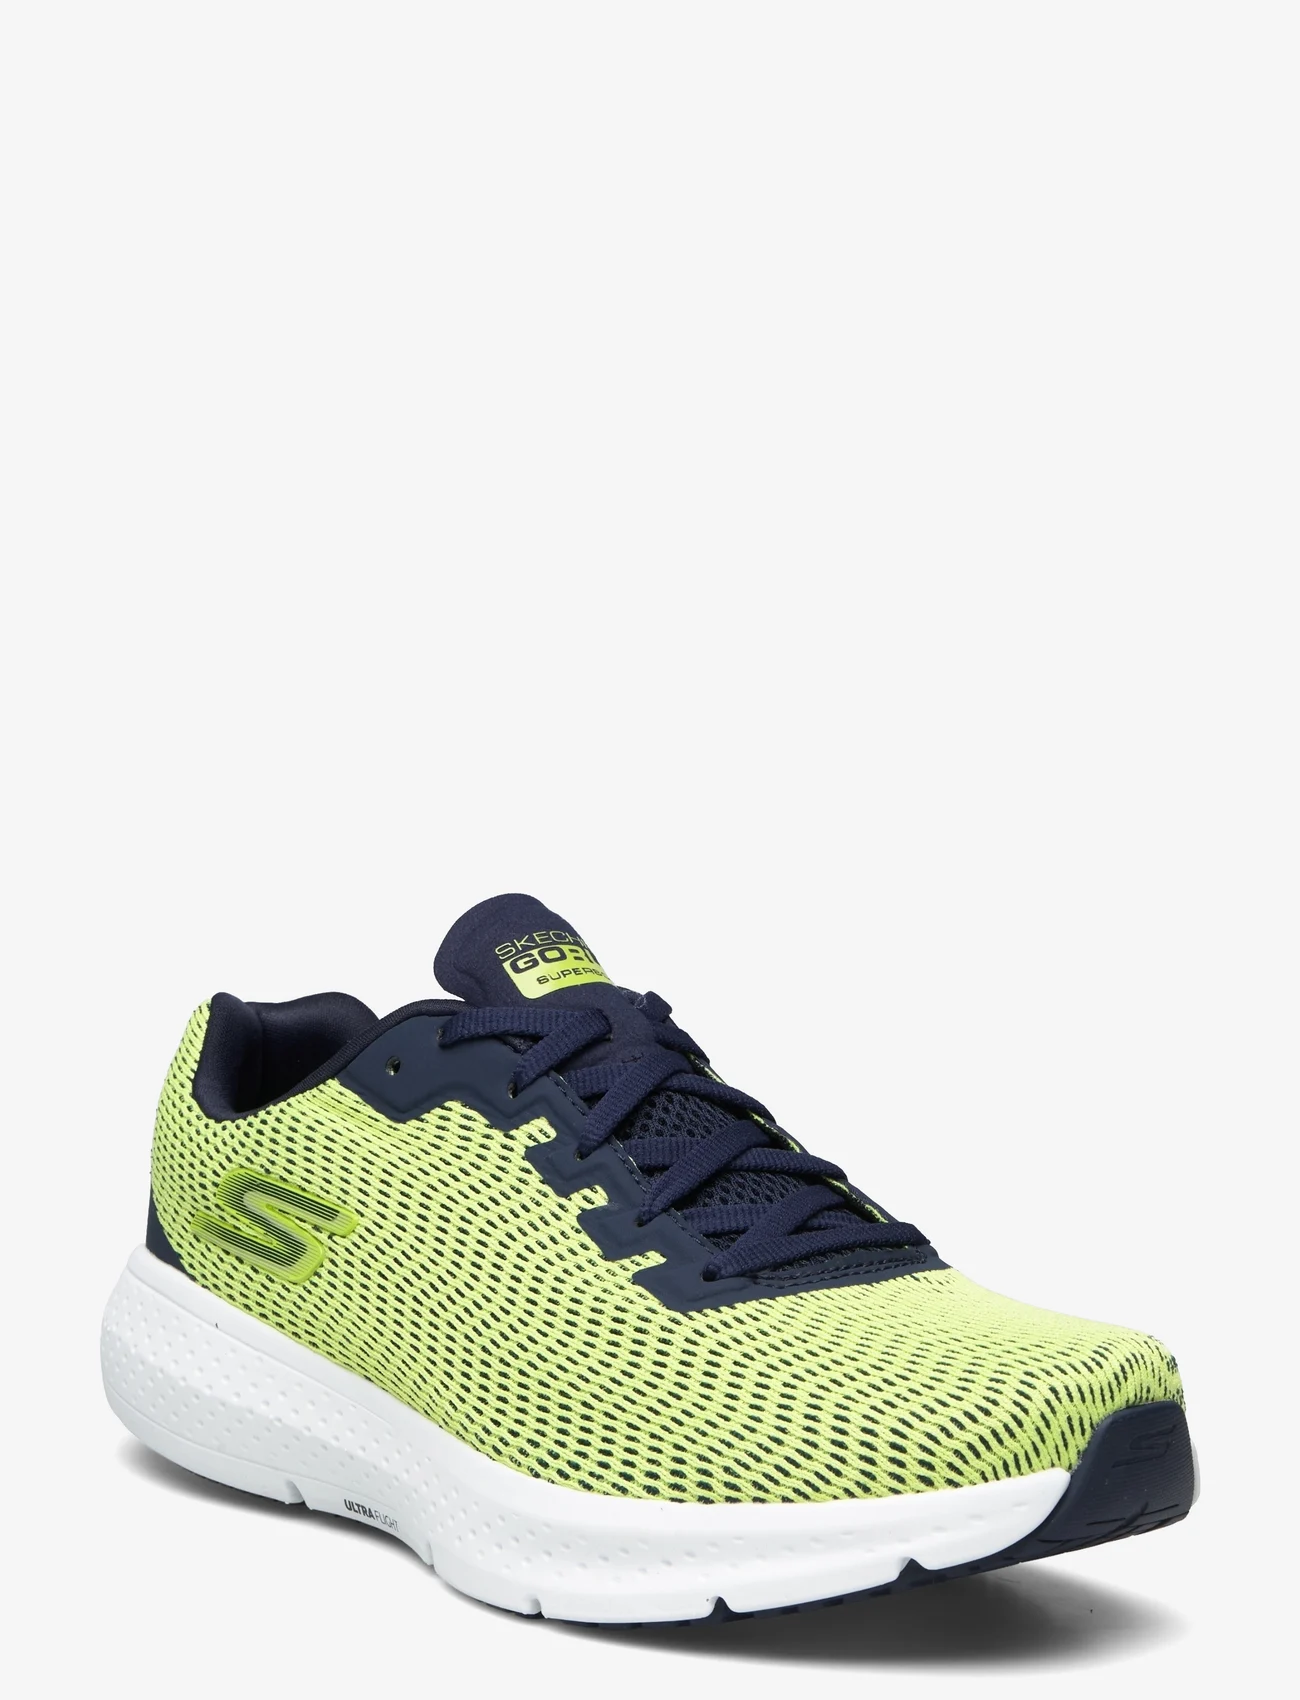 Skechers - Mens Go Run Supersonic  - Relaxed Fit - løpesko - ylnv yellow navy - 0